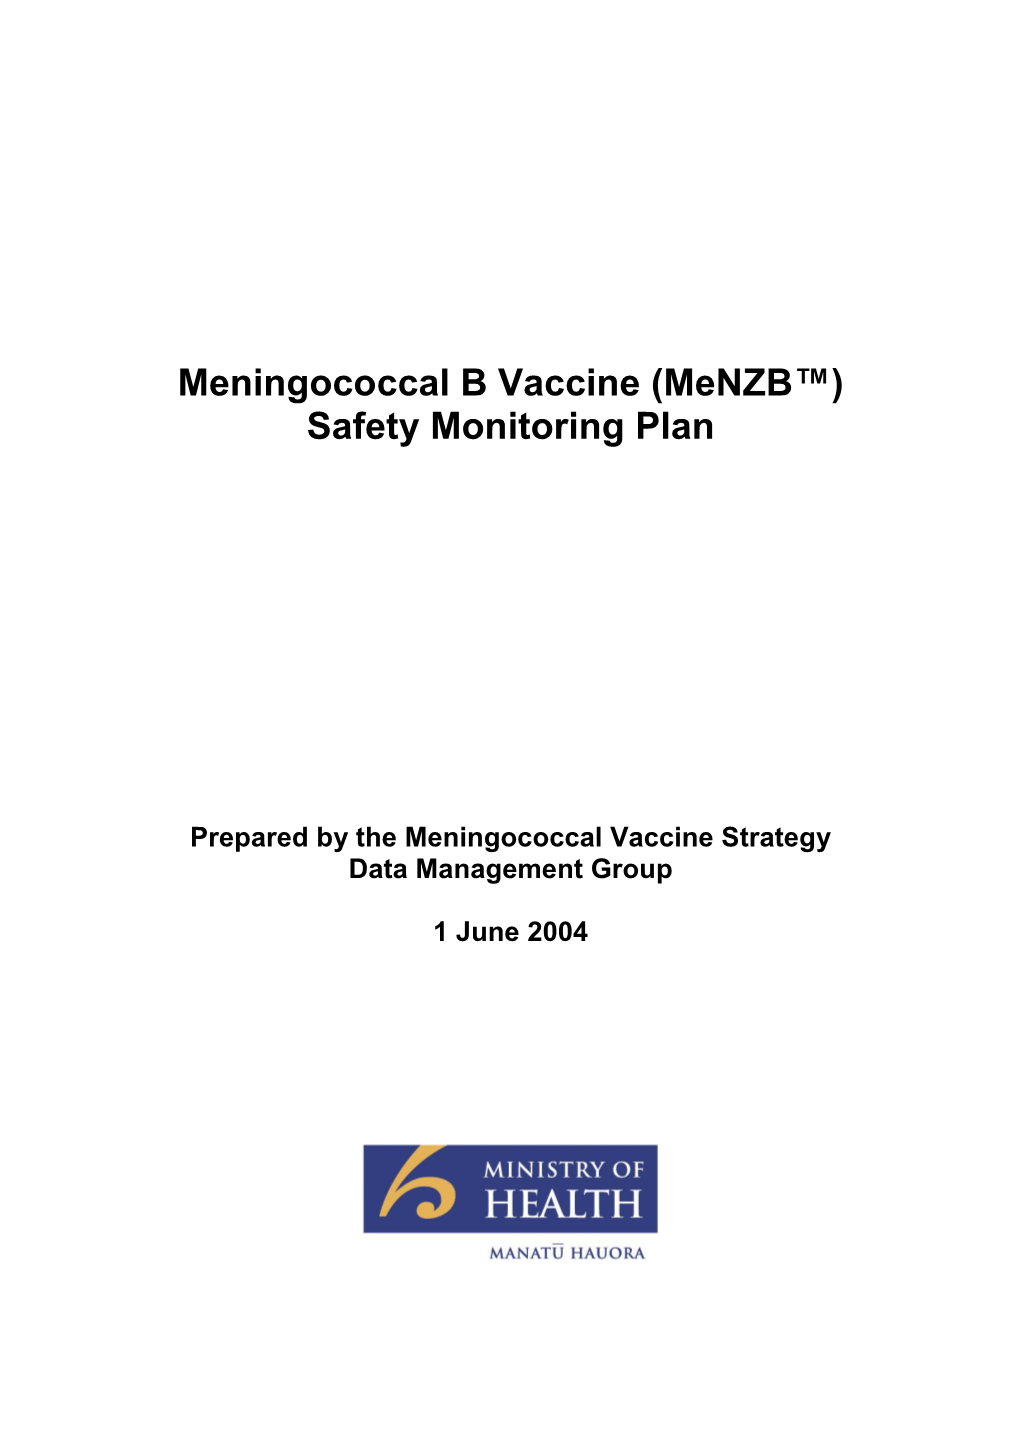 Menzb™ Vaccine Safety Monitoring Plan Is Organised to Provide the DMG with Prompt Reports of Cases of Aes, in Particular Those Involving Hospitalisation